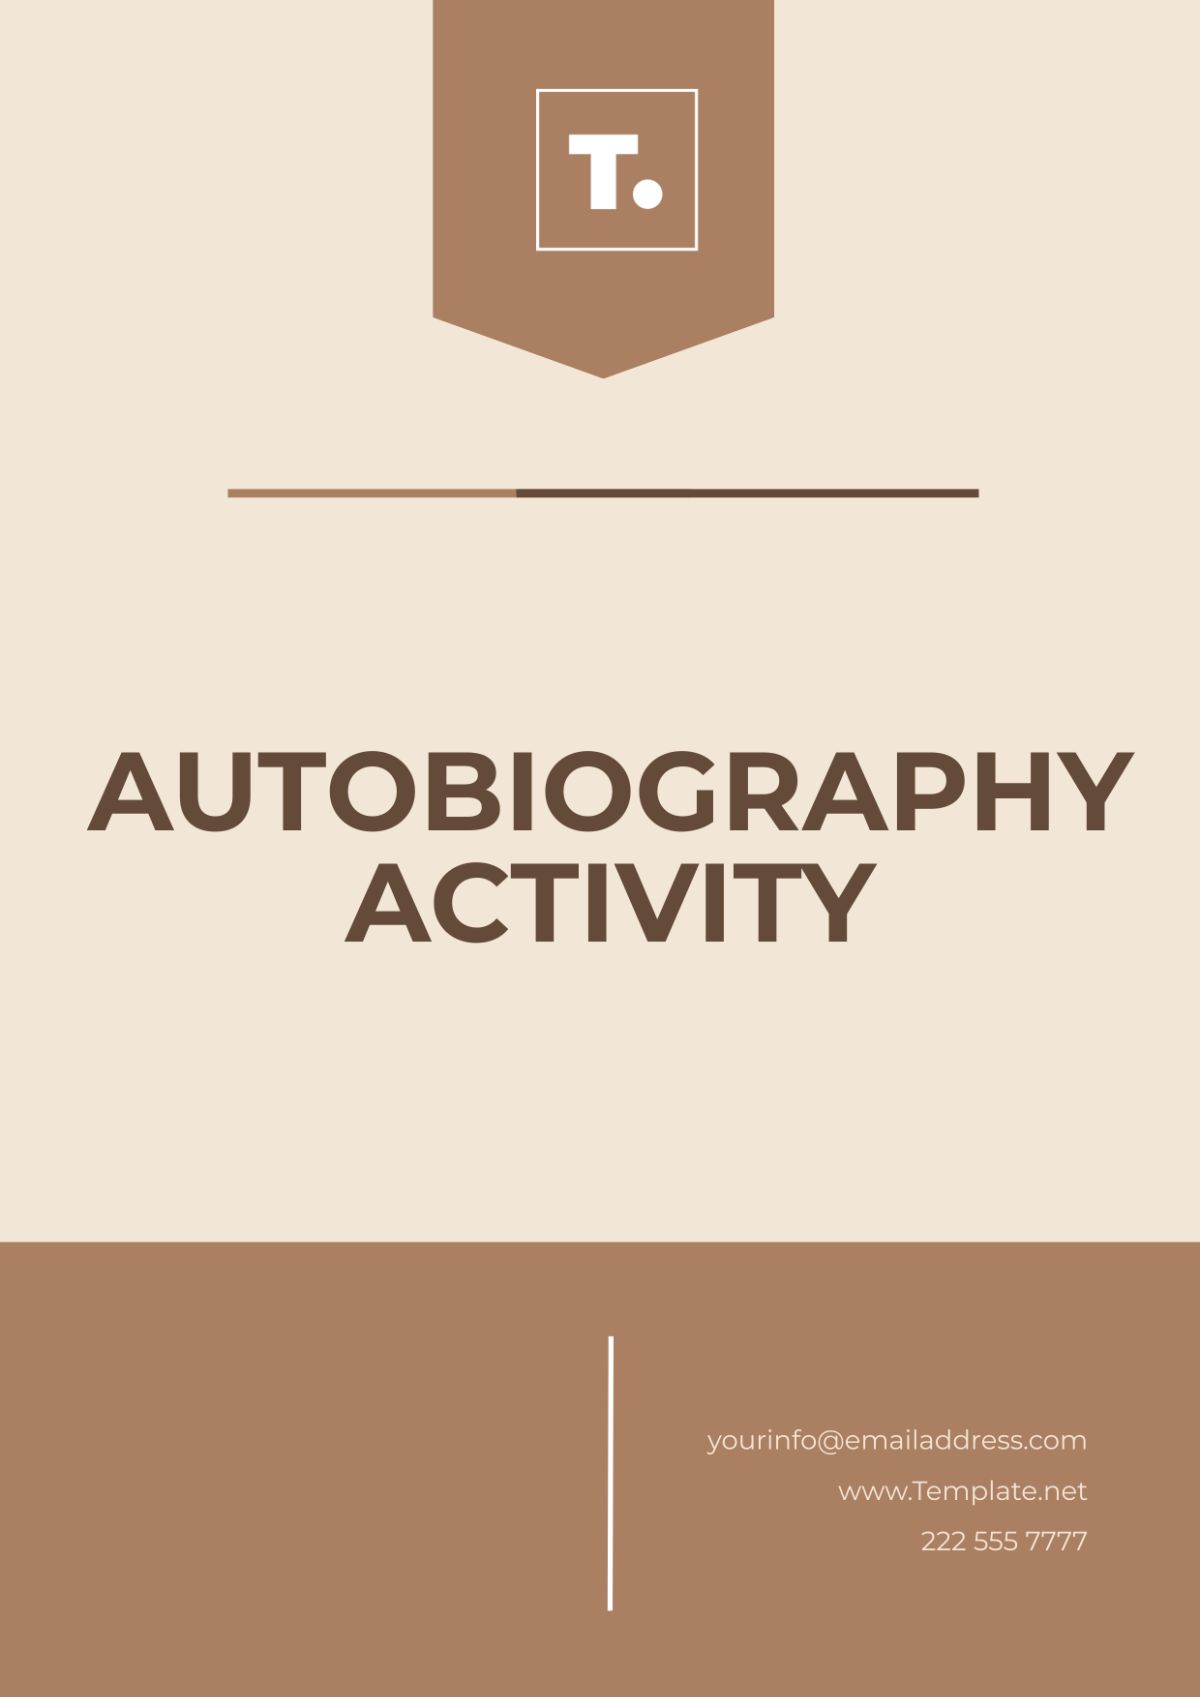 Free Autobiography Activity Template